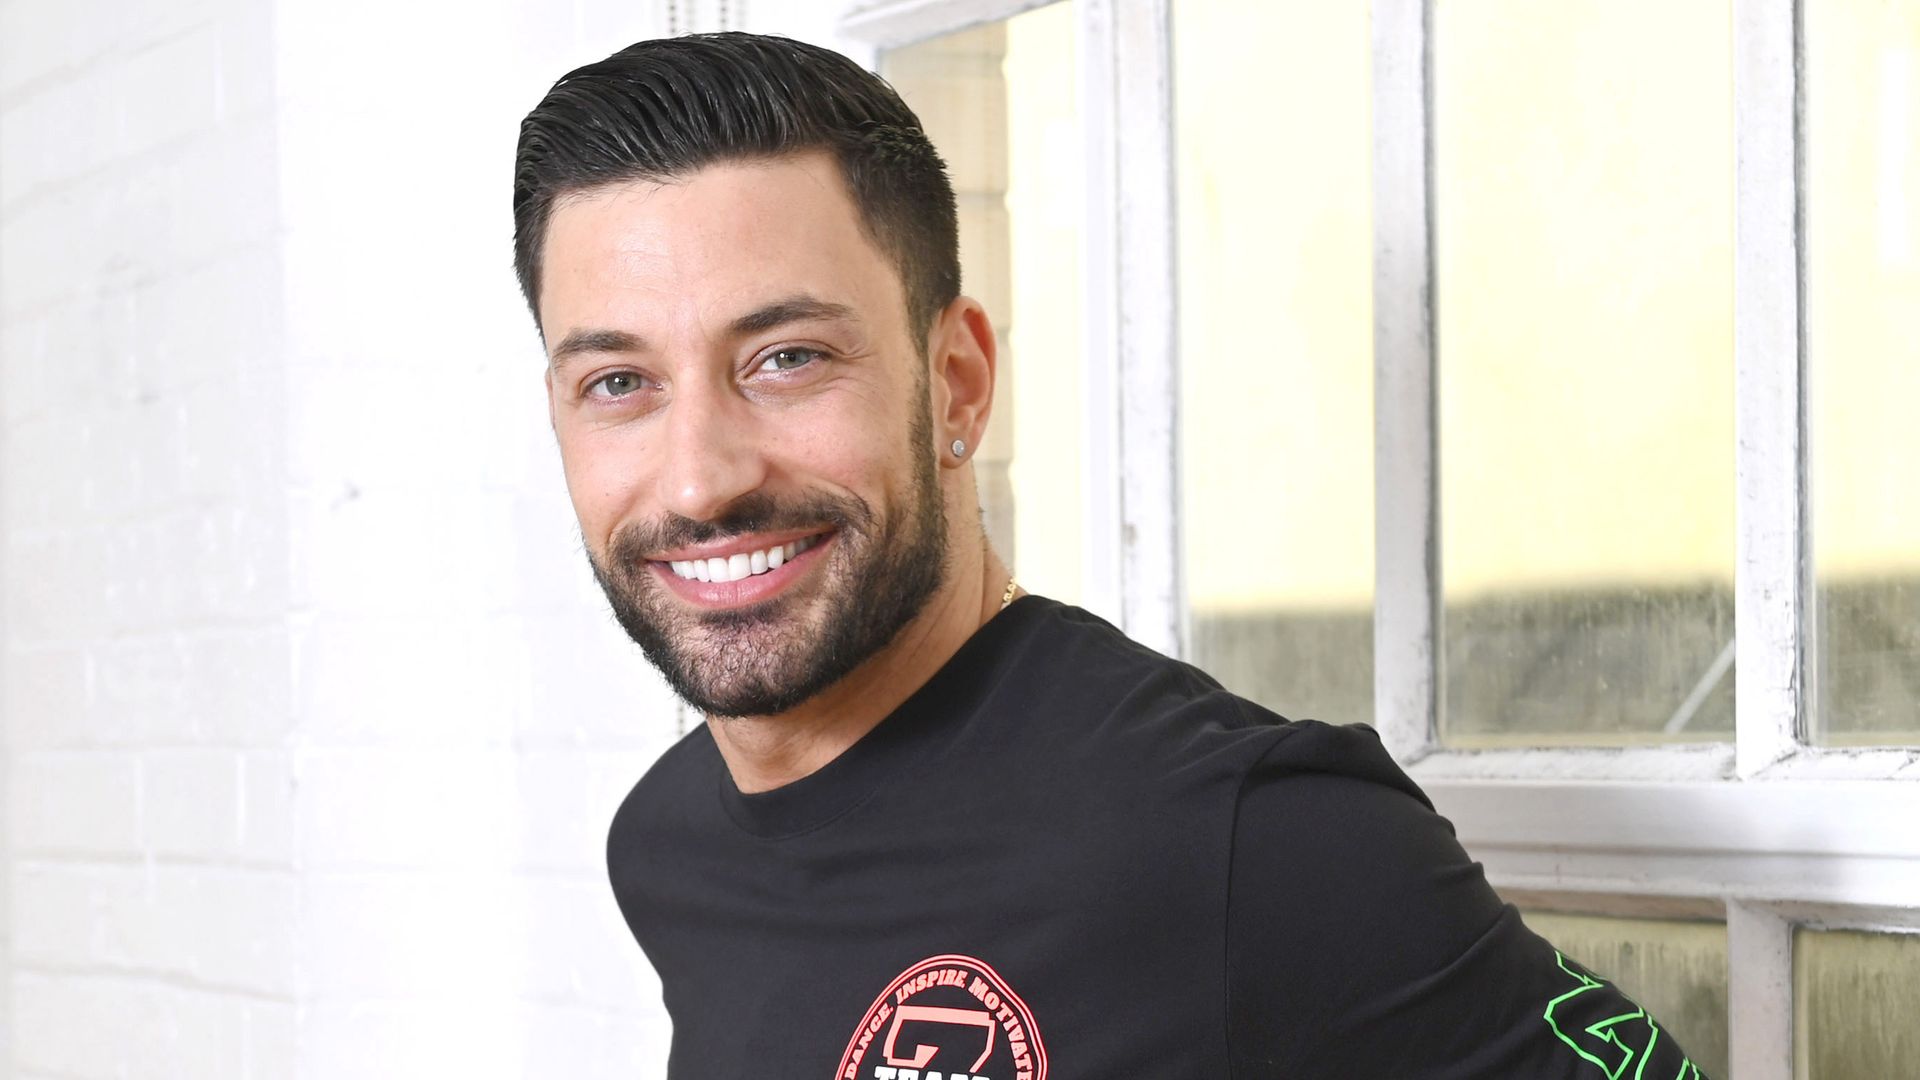 Giovanni Pernice co-hosts an adrenaline-fueled Zumba class